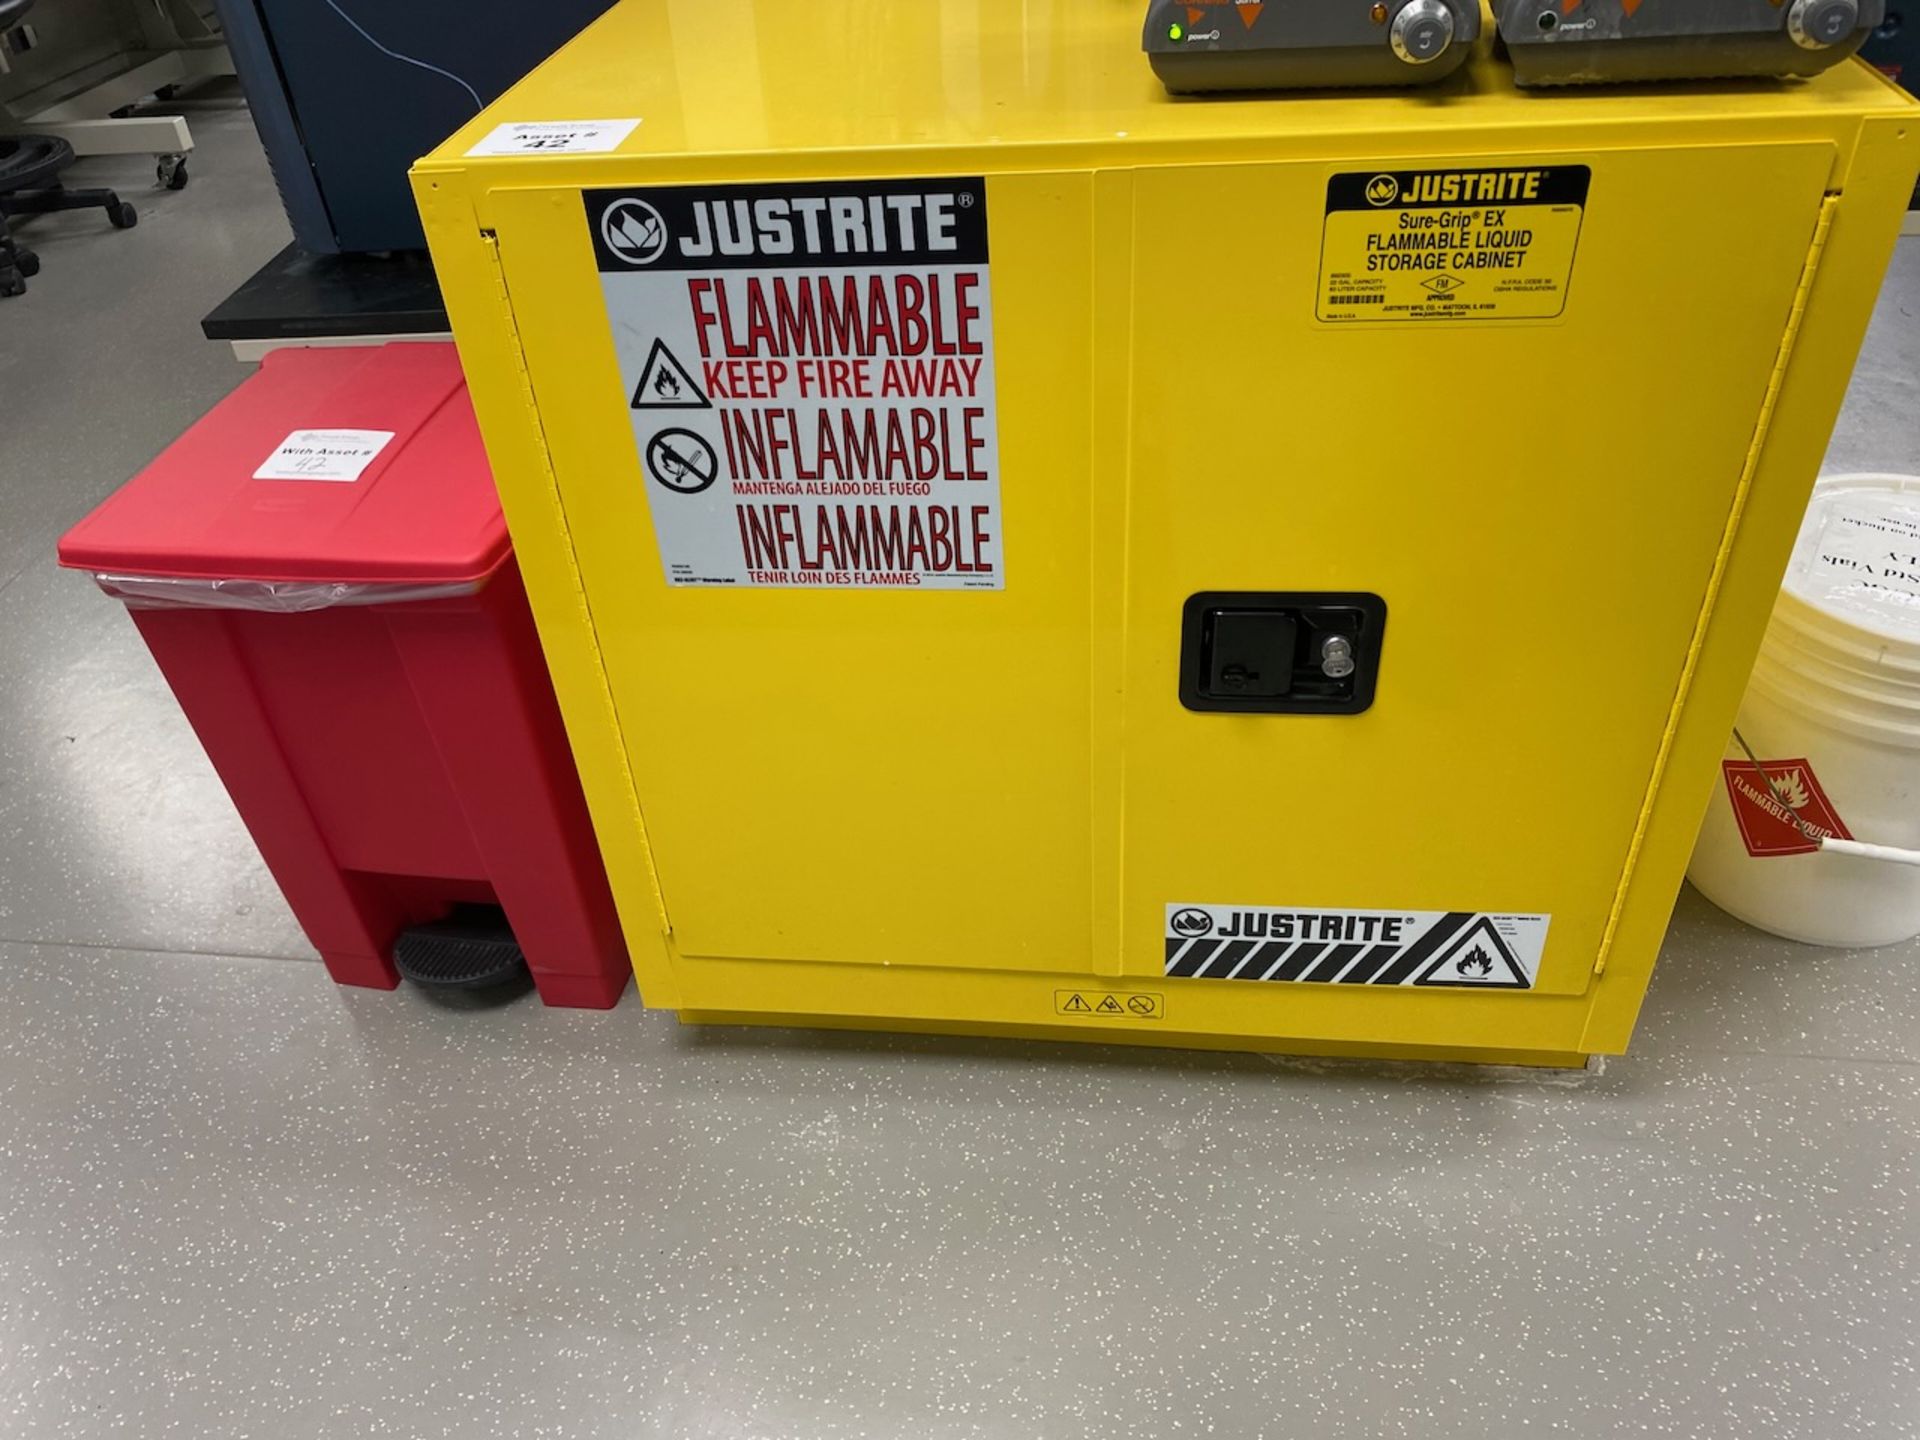 Justrite Flammable Storage Cabinet - Image 2 of 4